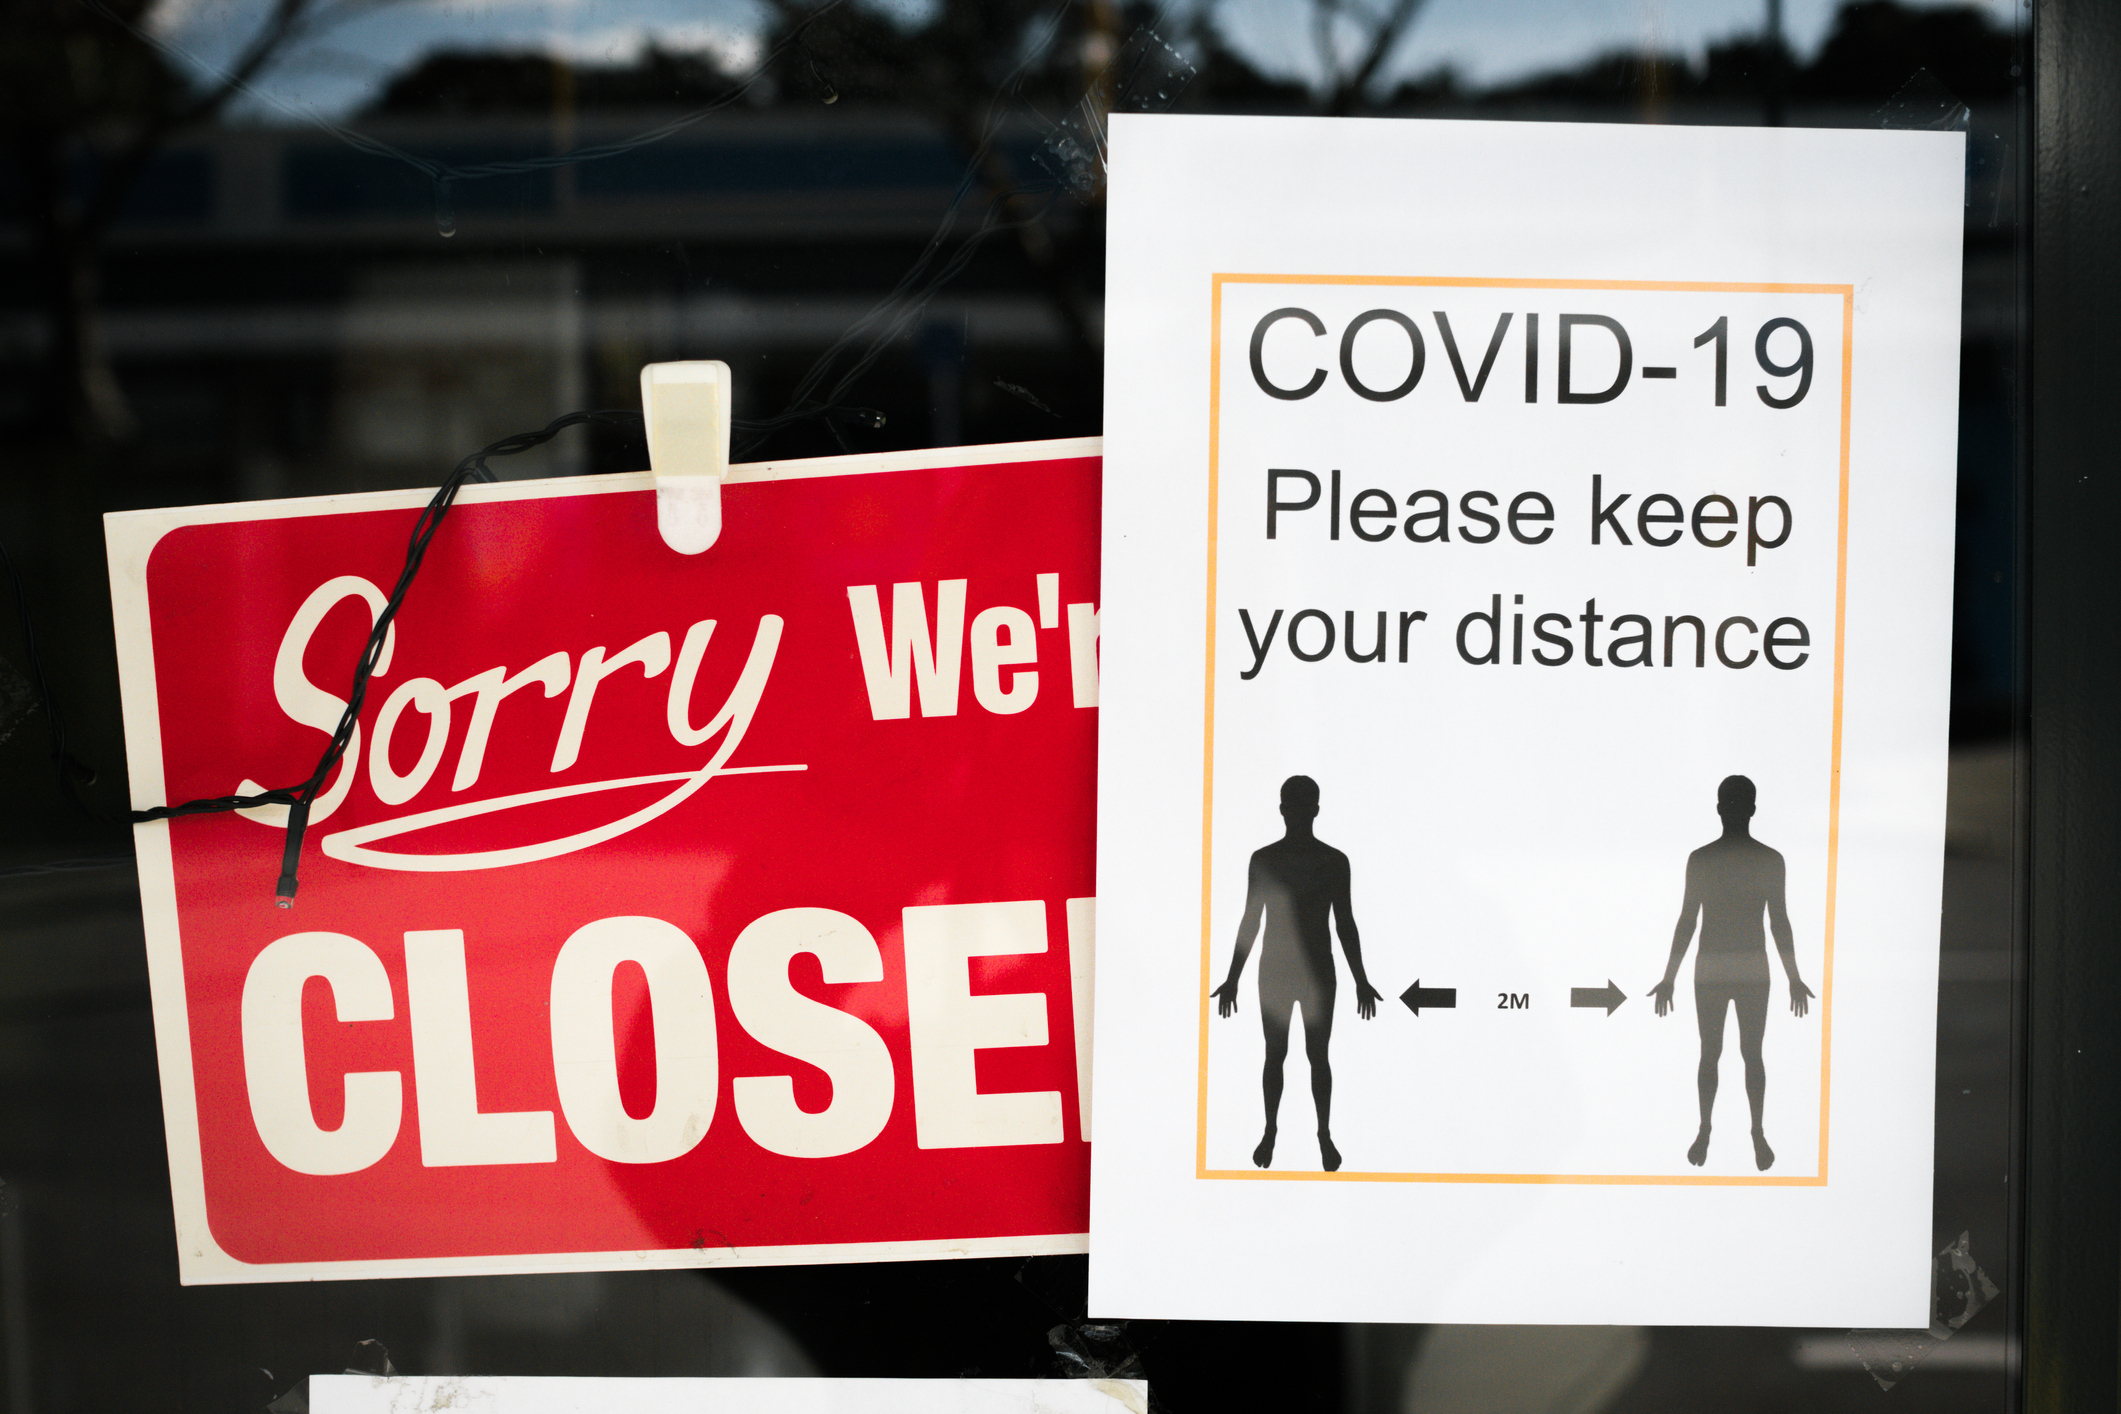 Signs on a door indicating closure and advising to maintain a 2-meter distance due to COVID-19